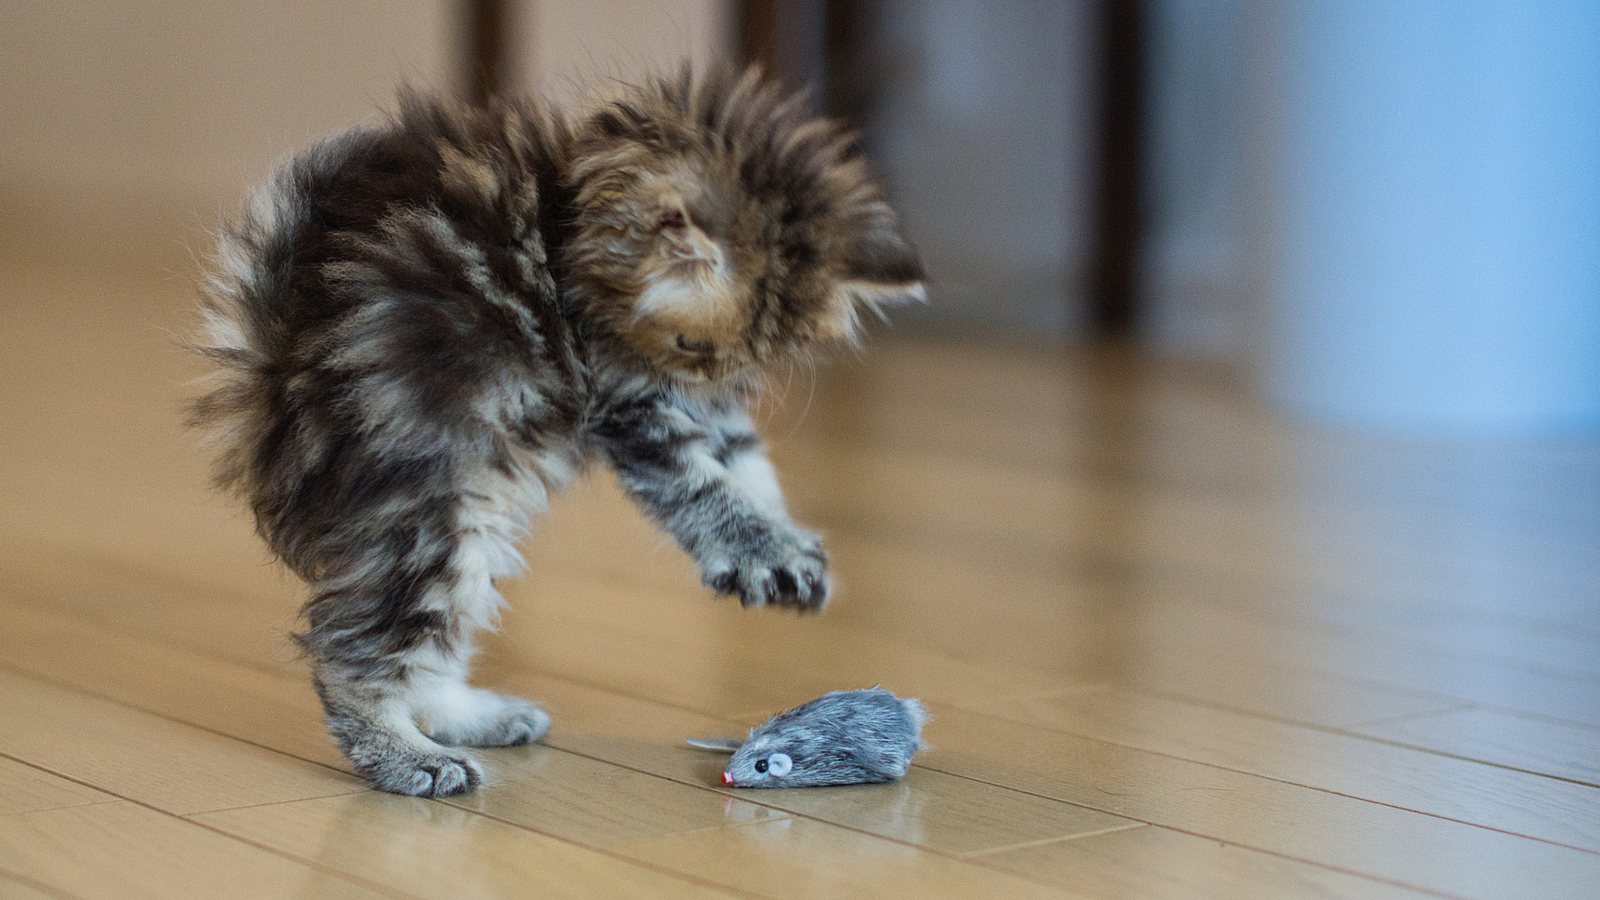 Funny Kitten Playing With Toy Mouse screenshot #1 1600x900